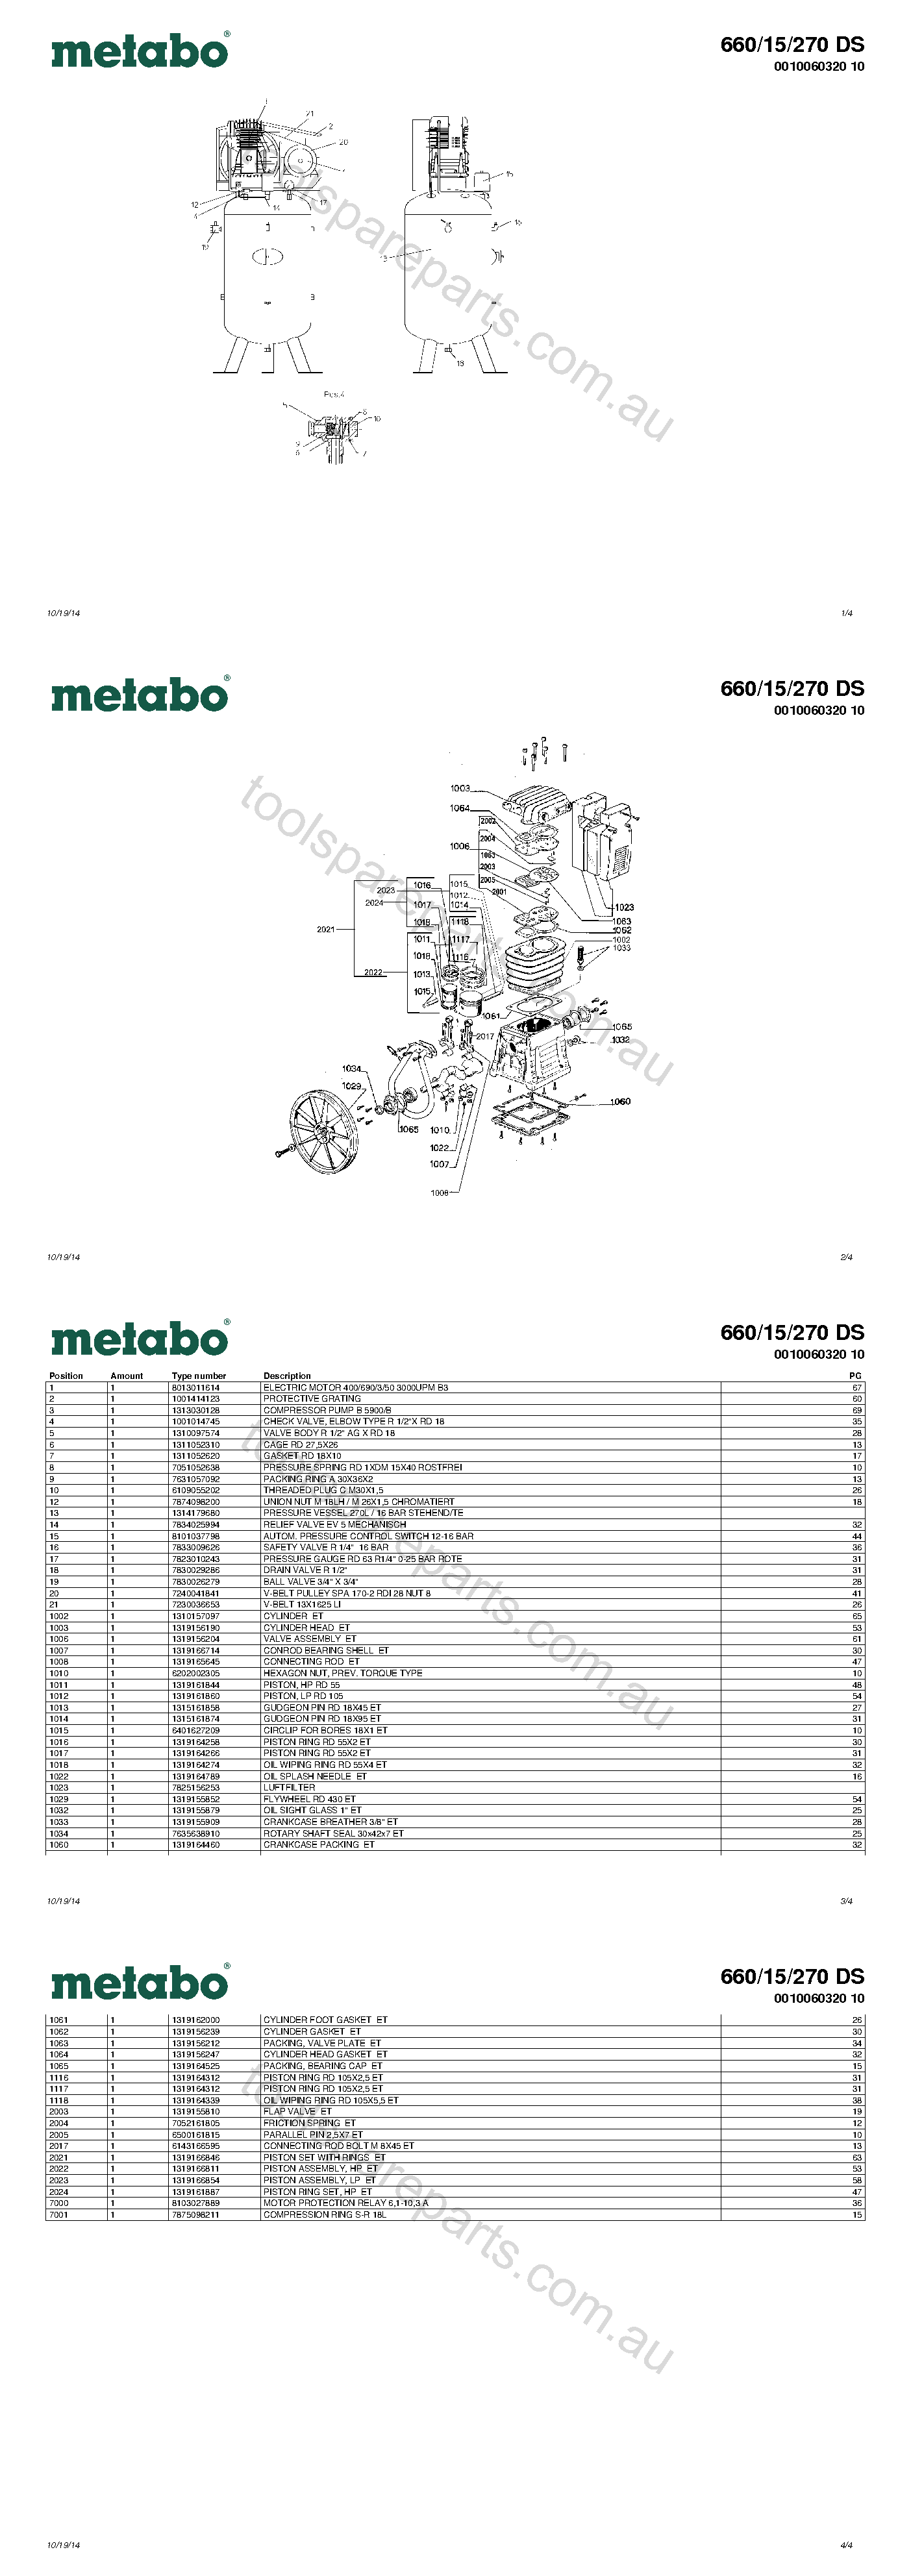 Metabo 660/15/270 DS 0010060320 10  Diagram 1